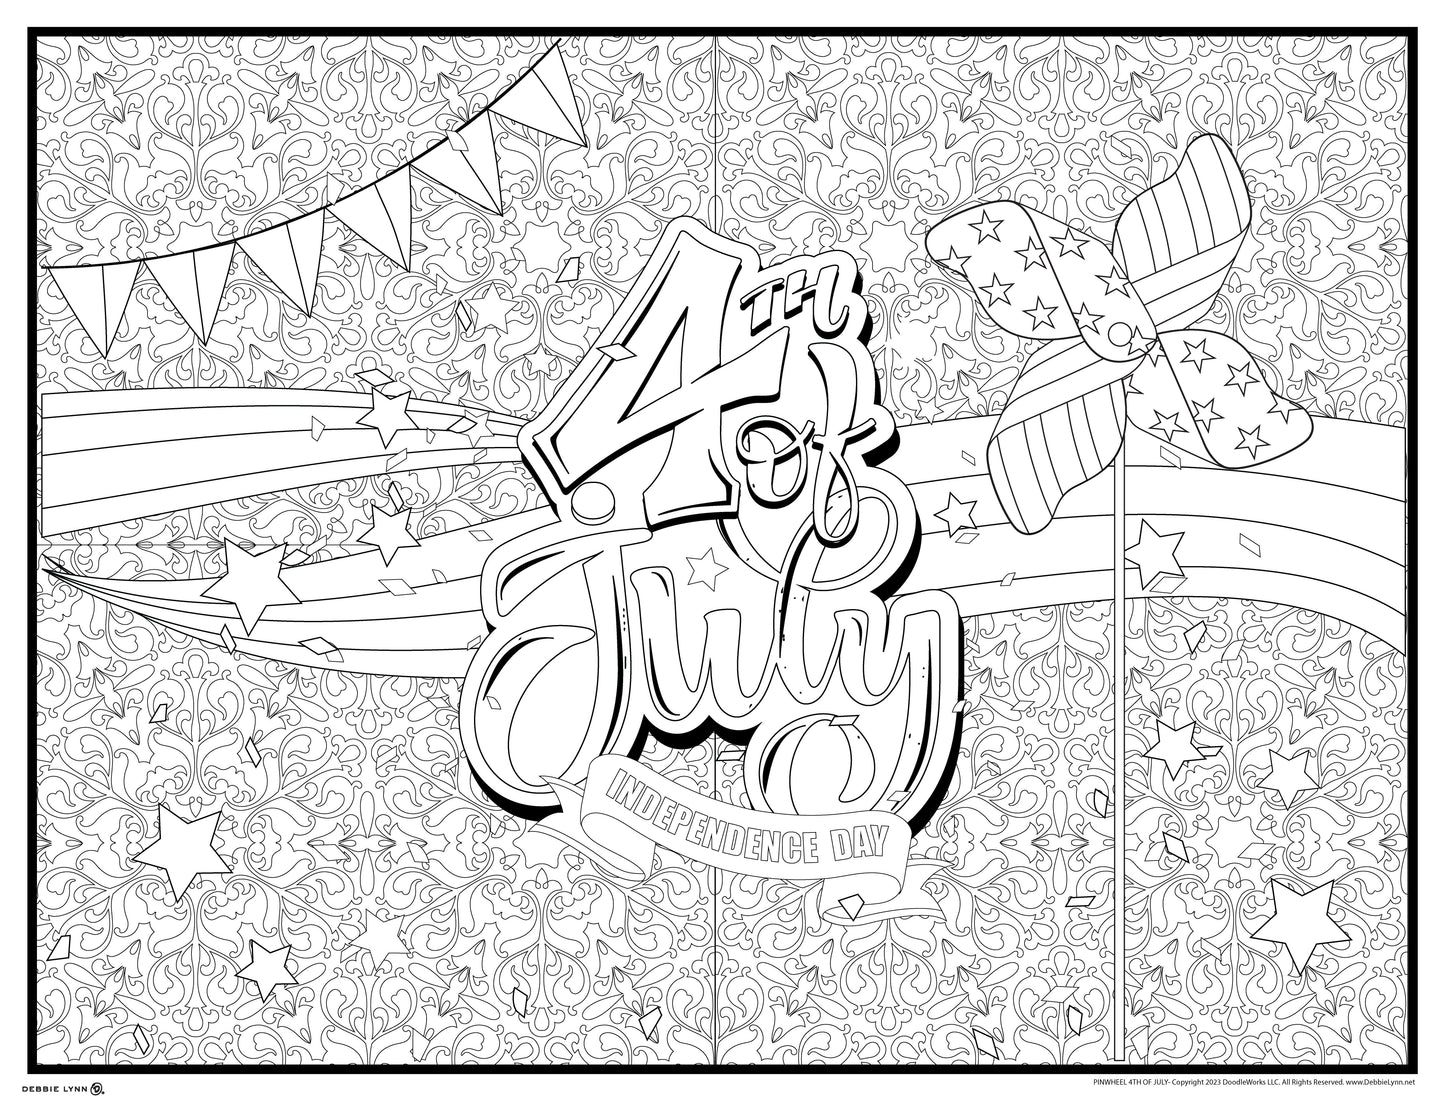 Pinwheel July 4th Personalized Giant Coloring Poster 46"x60"